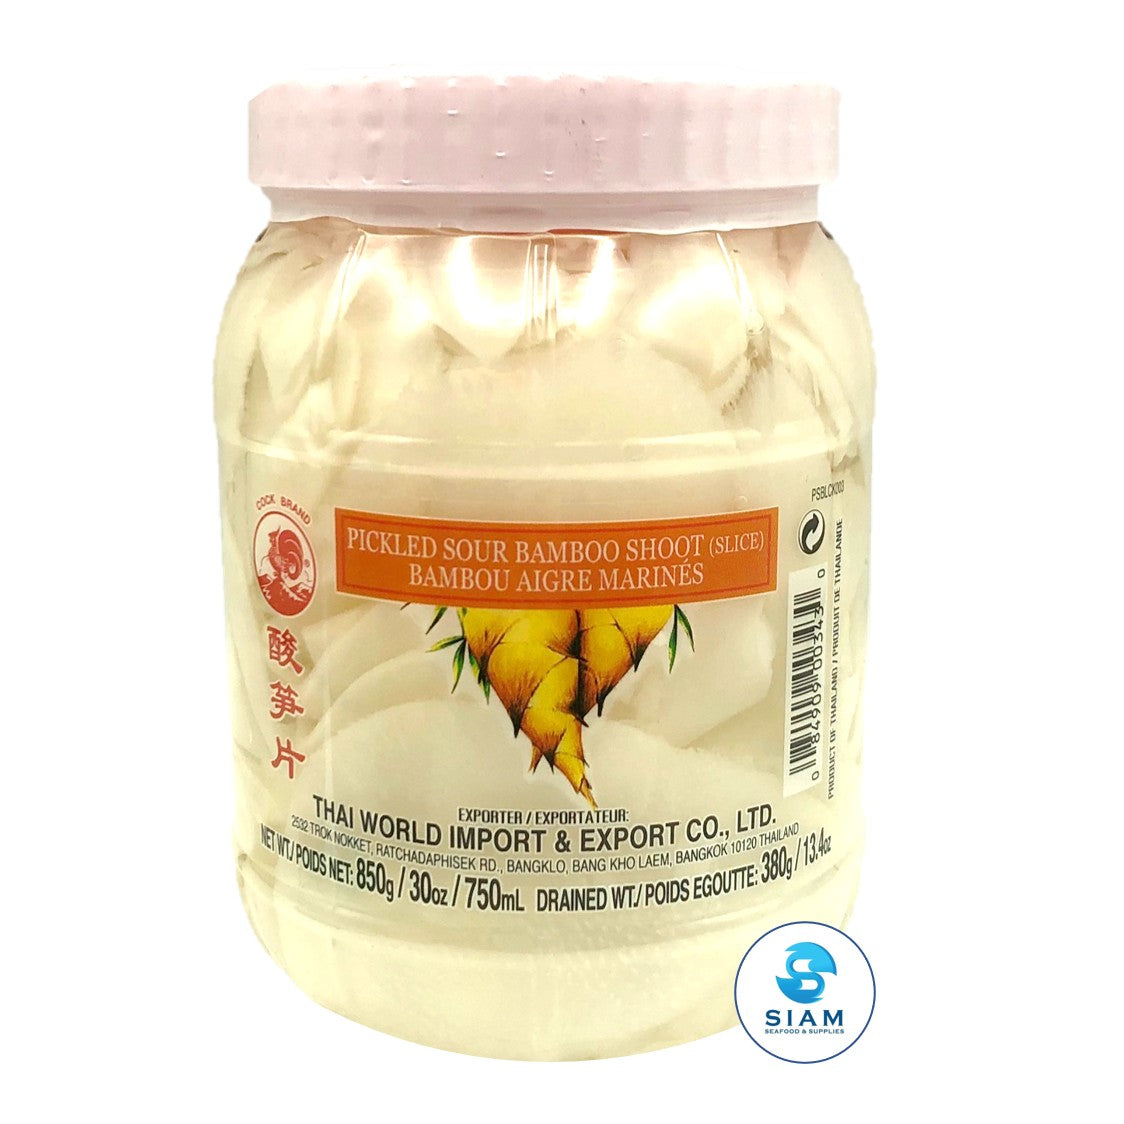 http://siamstore.us/cdn/shop/products/Pickled-Sour-Bamboo-Shoot-_Slice_---Cock-_Drained-Wt-13.4-oz---Net-Wt-32.5-oz_-_-_-shippable-Cock-1619582584.jpg?v=1619582589